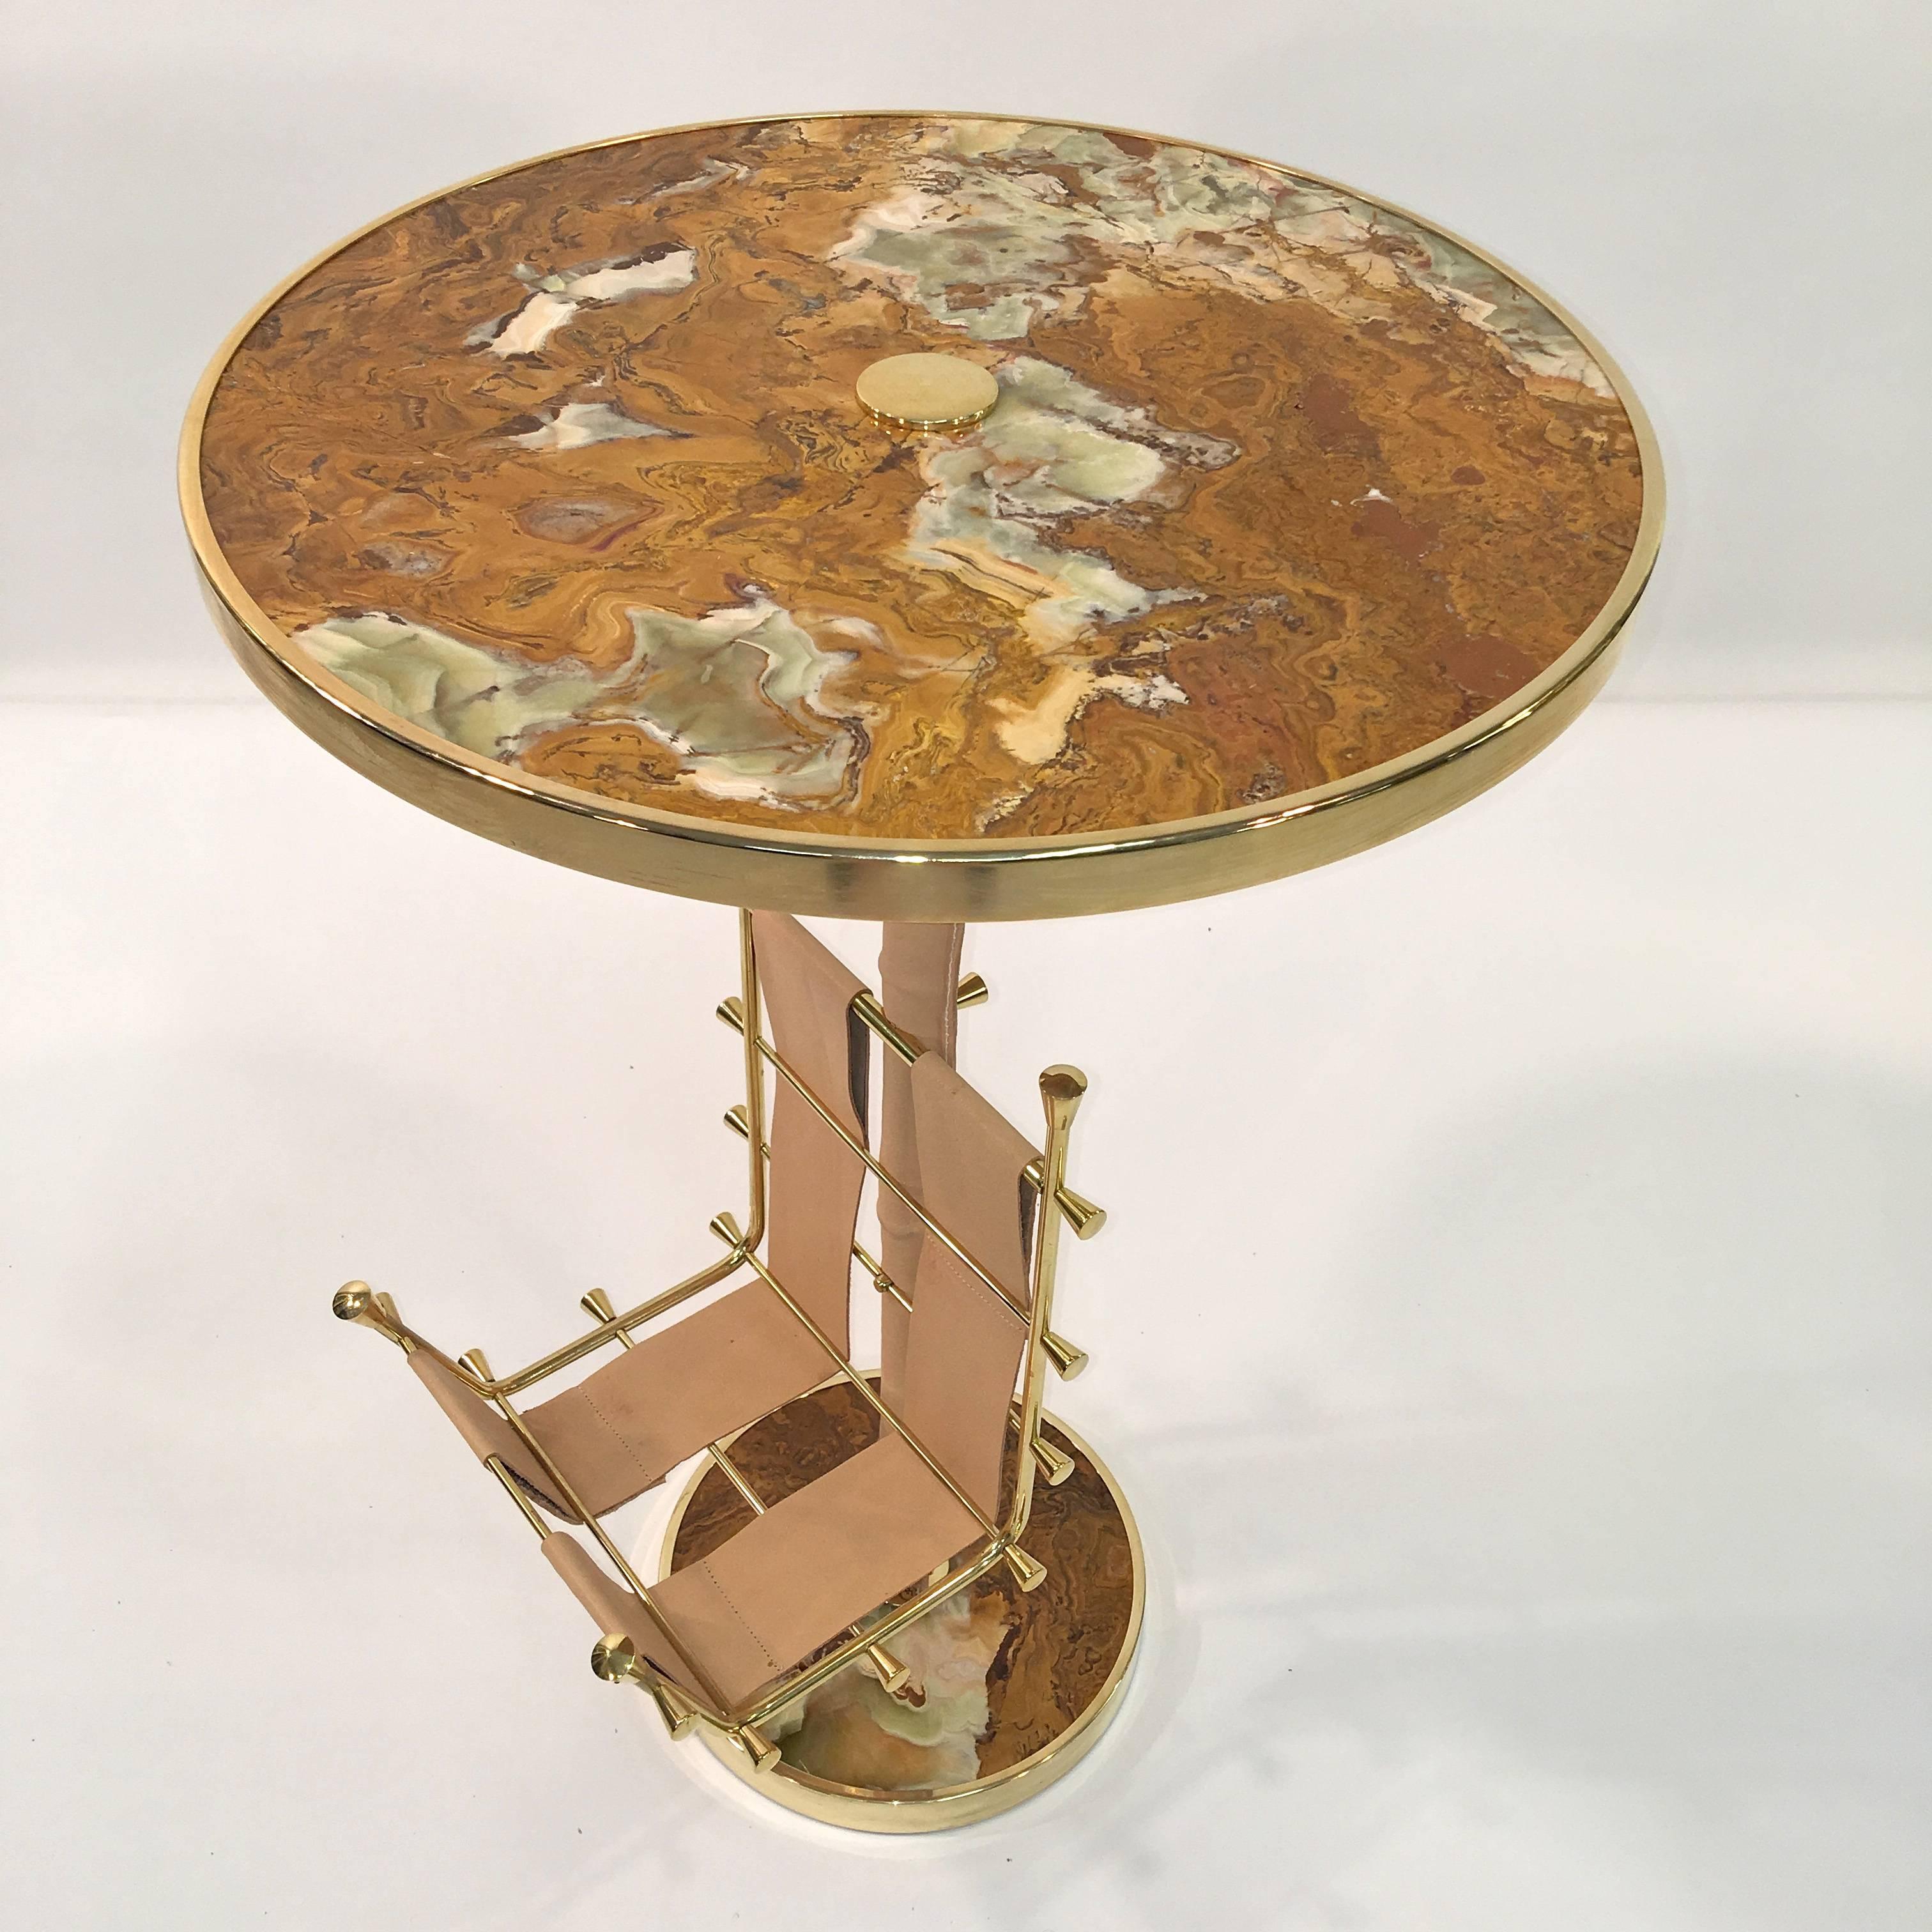 American Gilt Brass, Onyx and Stitched Leather Occasional Table with Magazine Rack For Sale